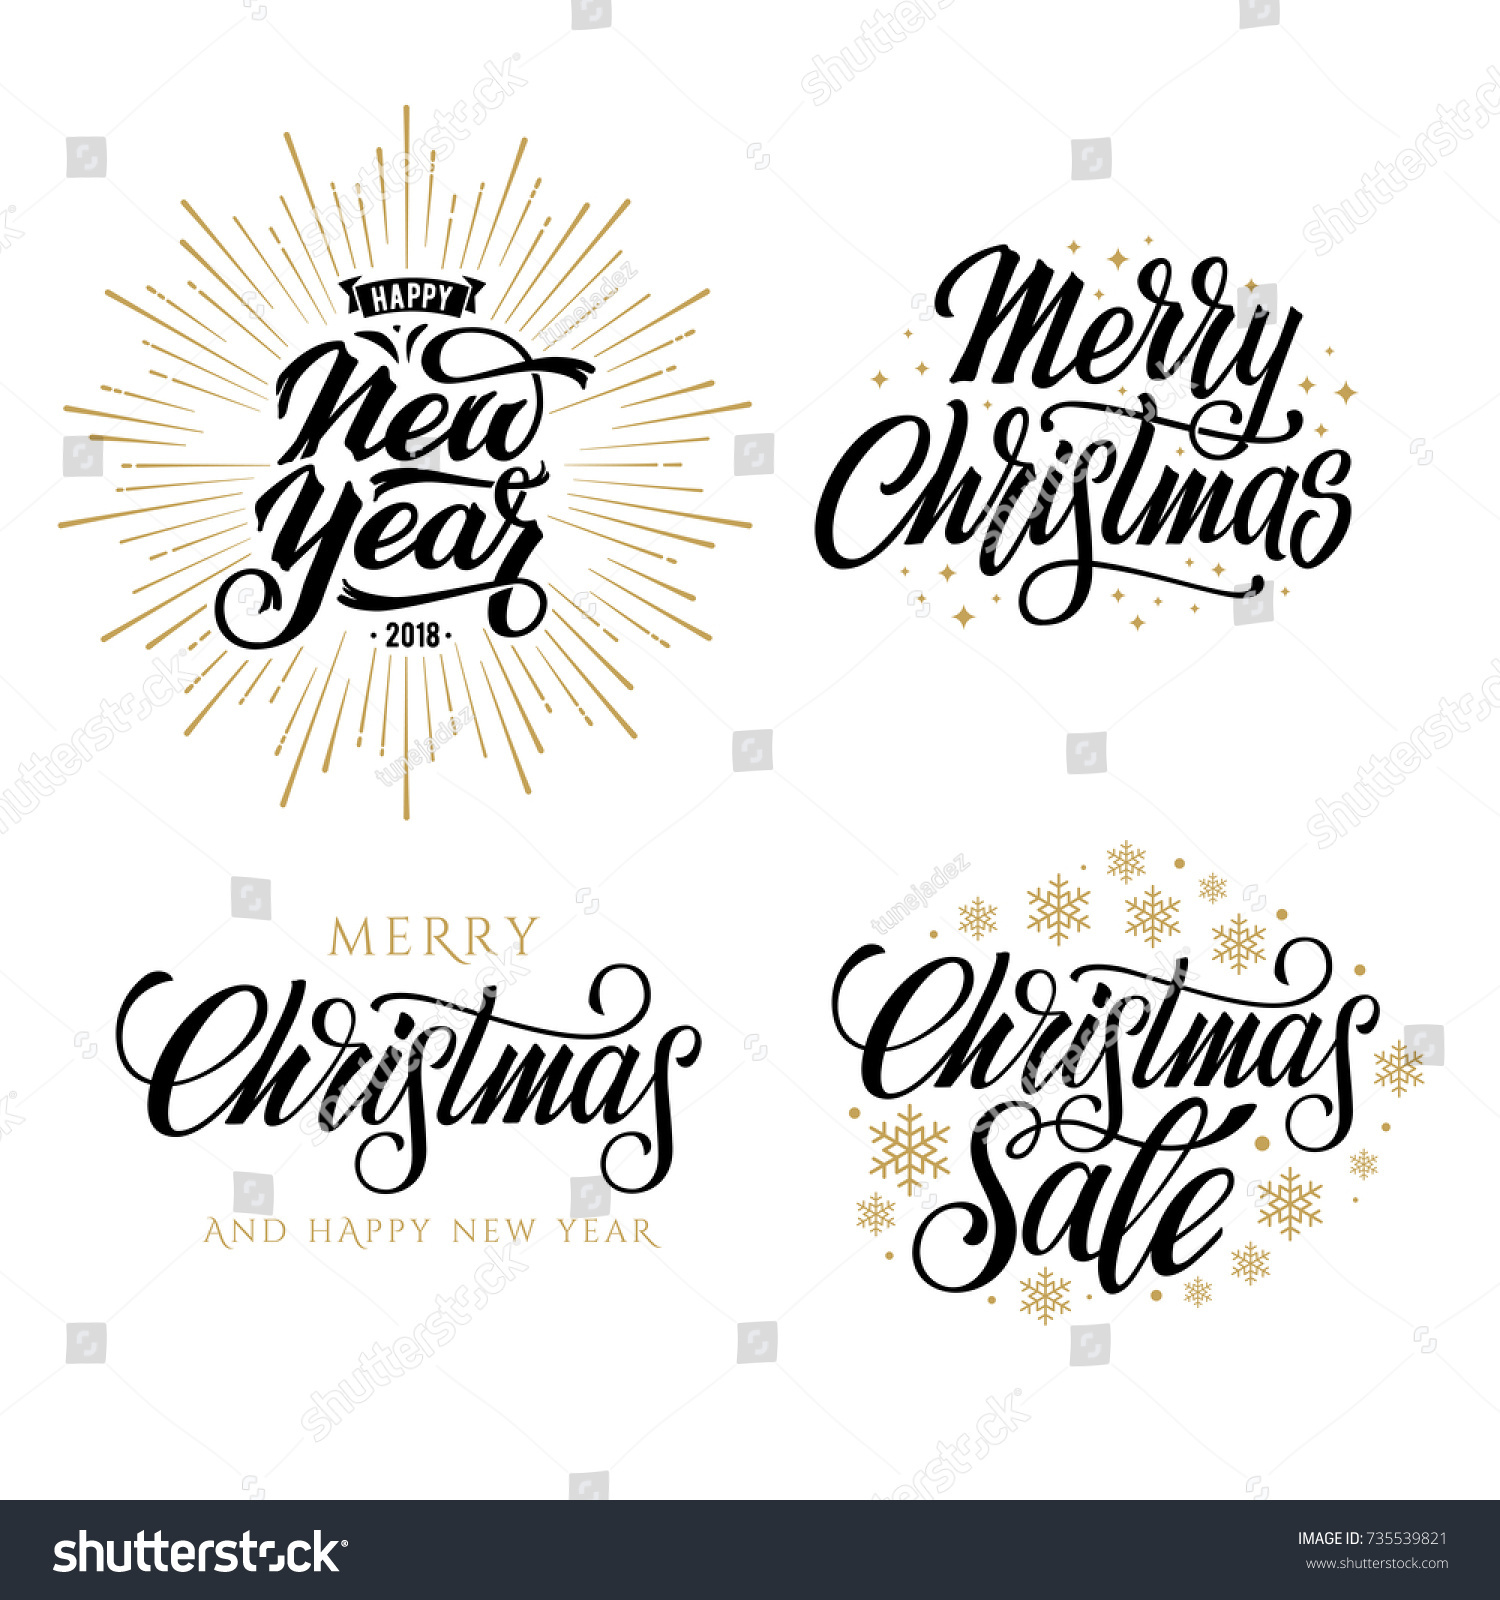 Merry Christmas Happy New Year 2018 Stock Vector Royalty Free